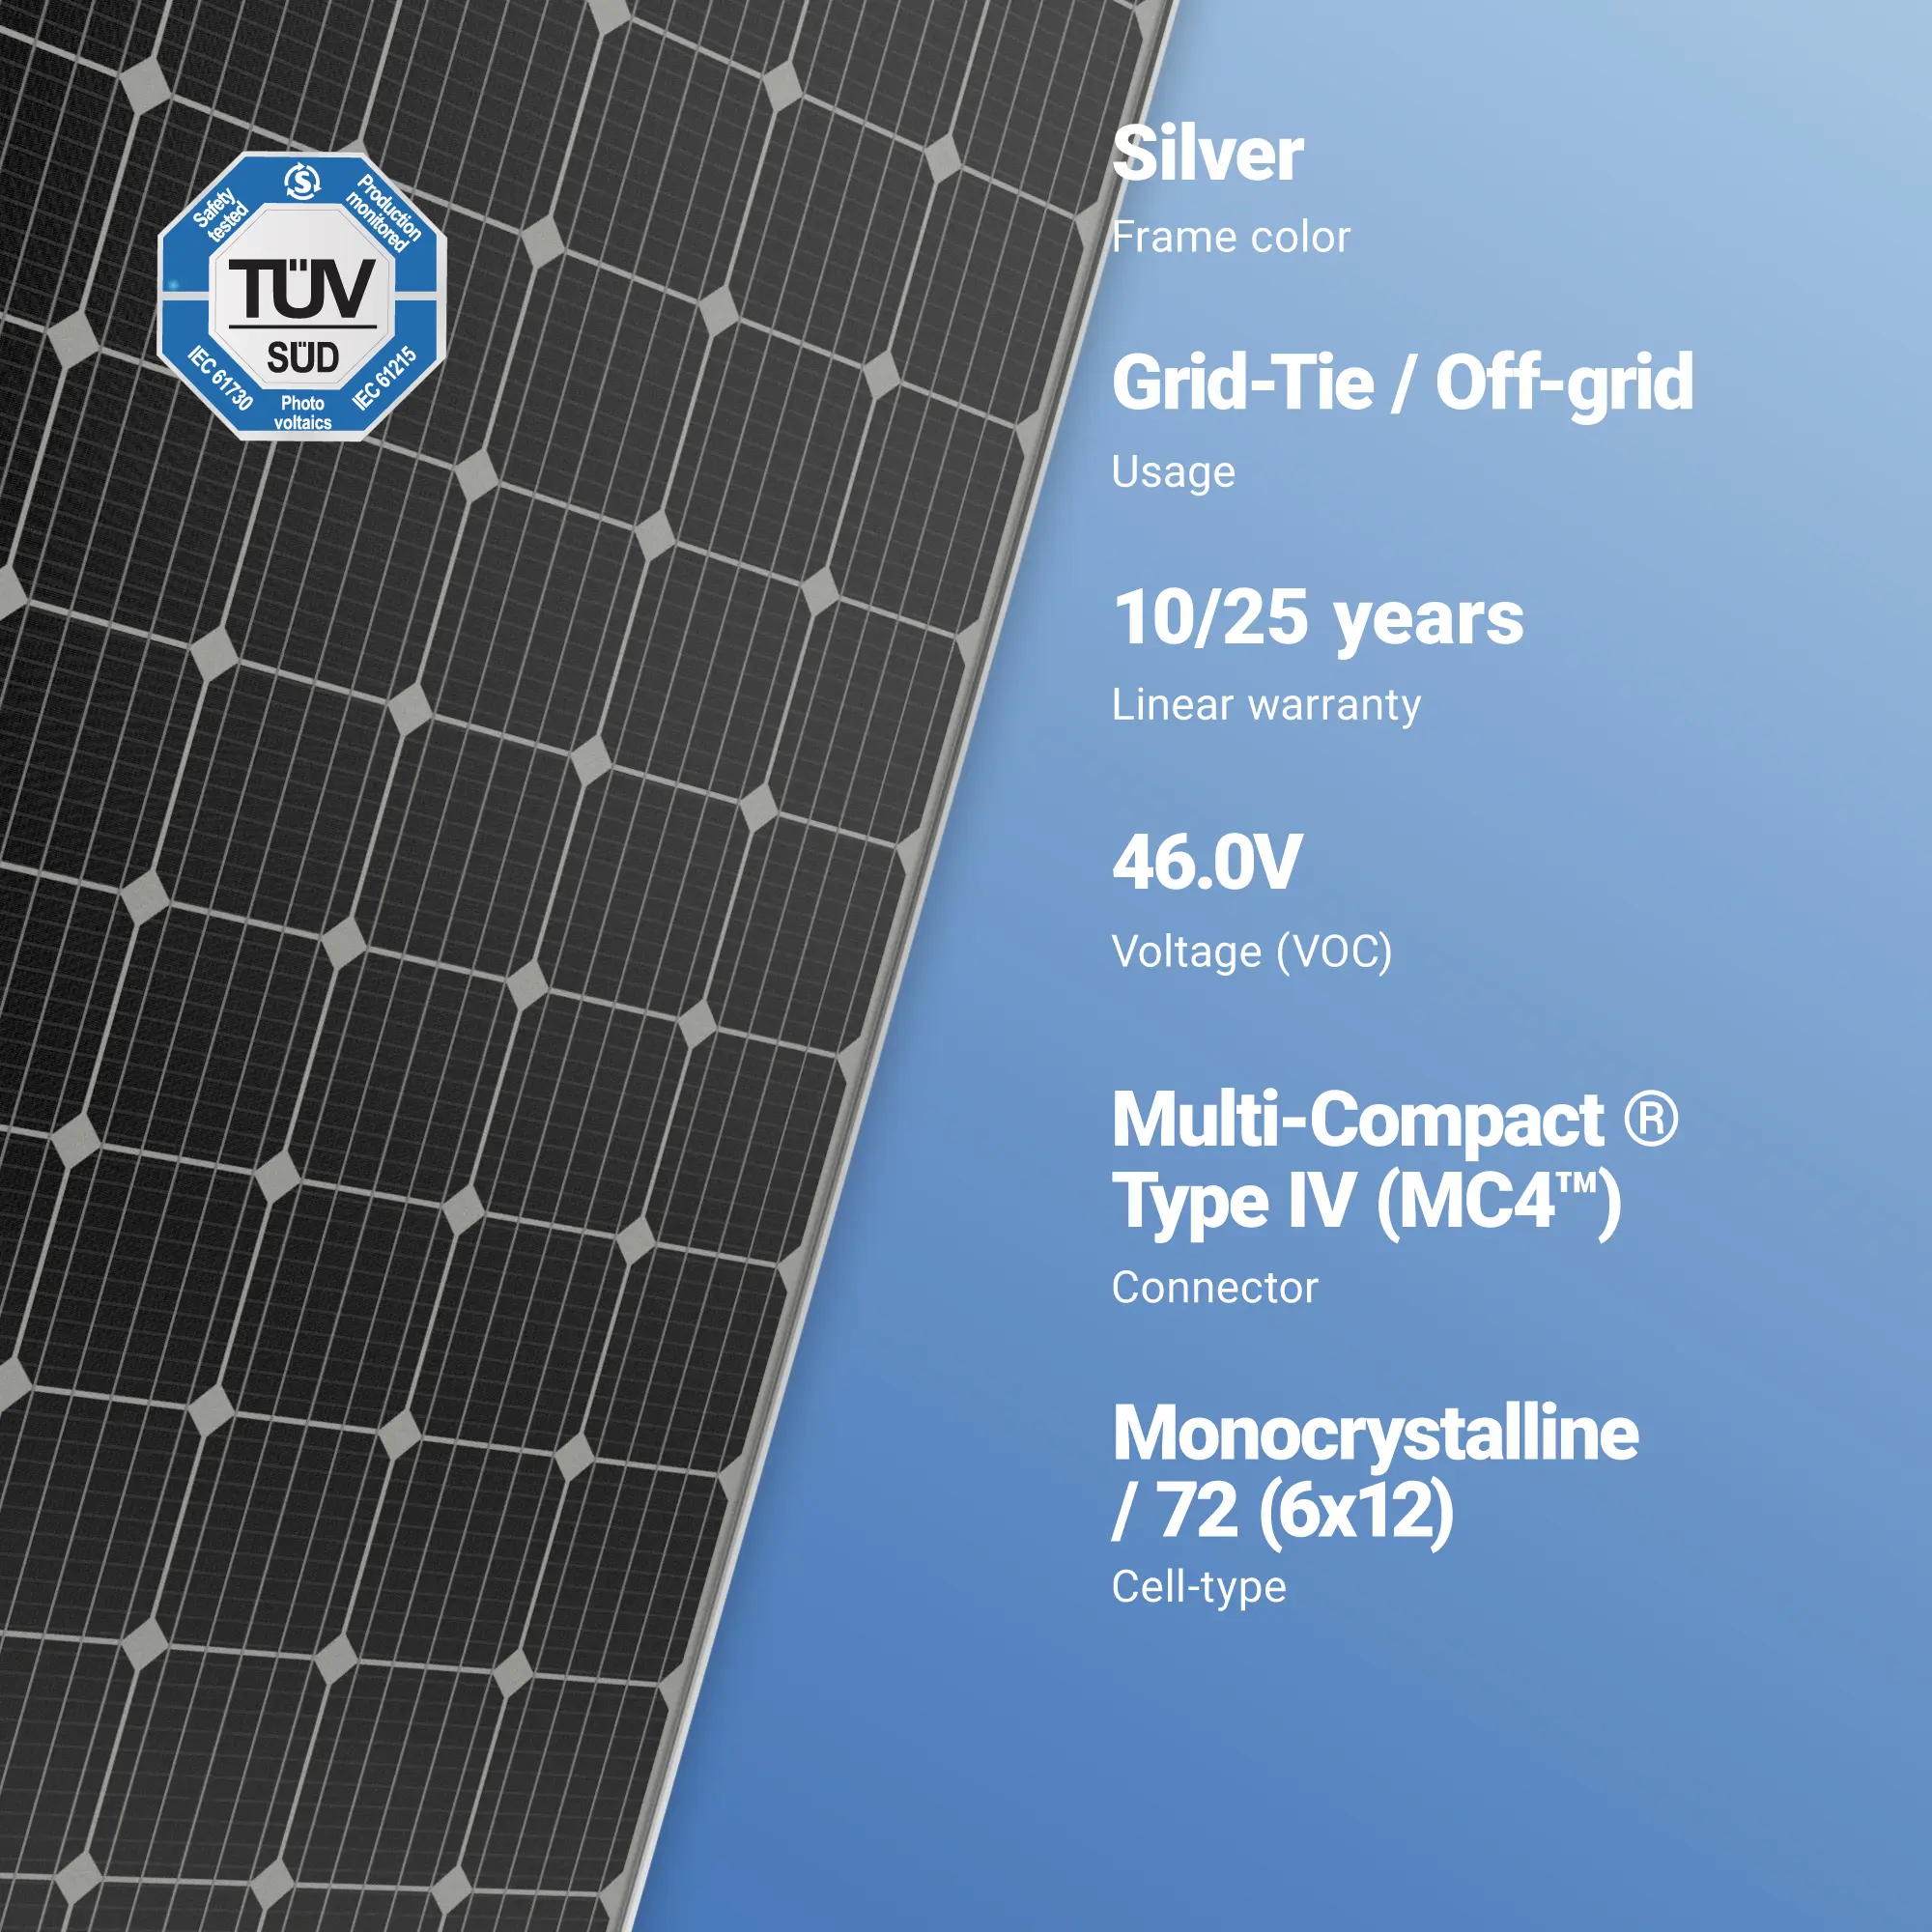 72 cell solar panel voc - What is the VOC of a 12v solar panel